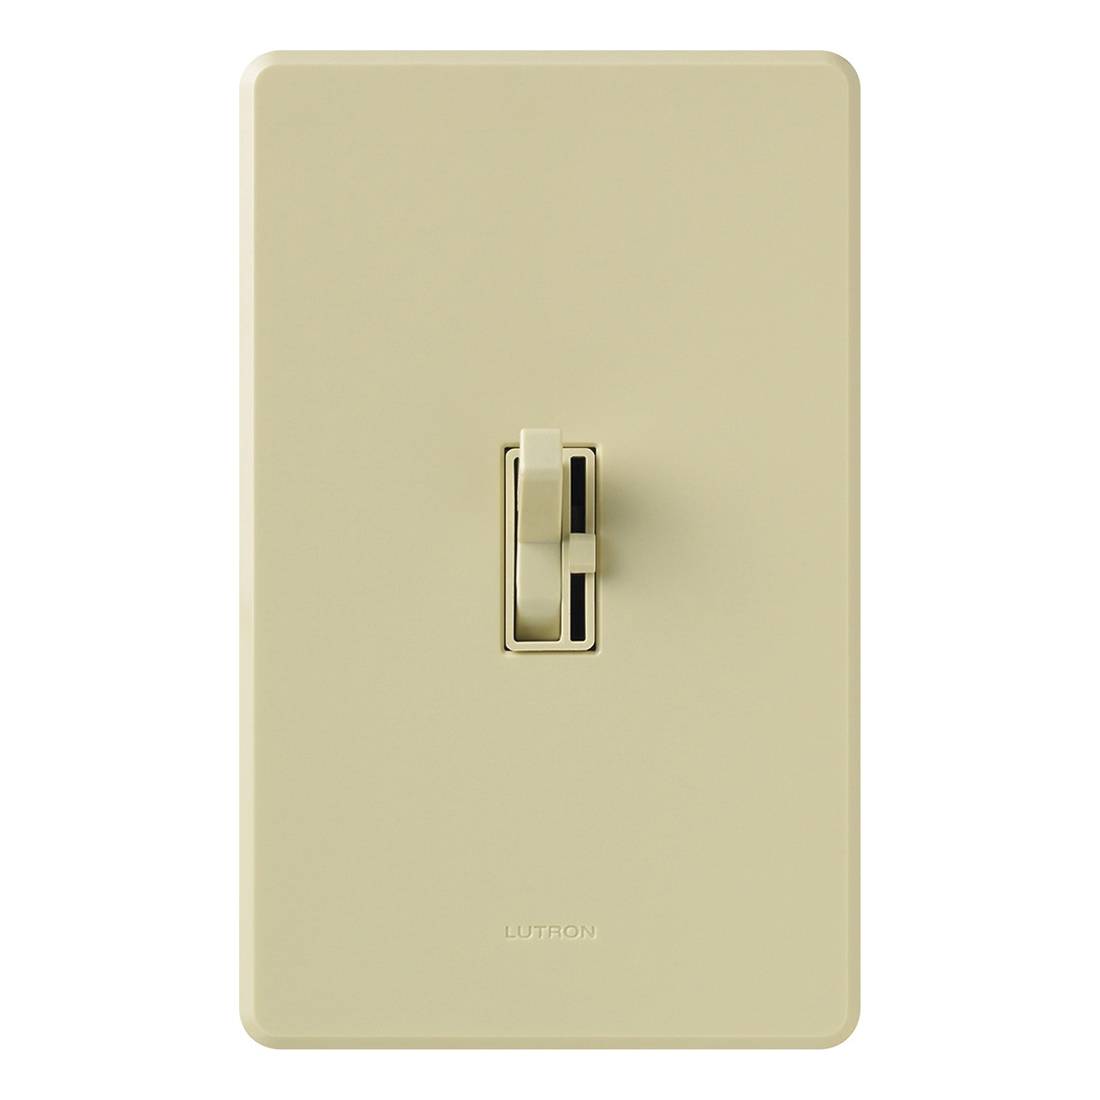 Lutron® Ariadni® Toggler® C.L® AYCL-153PH-IV 3-Way Traditional Style Dimmer Switch, 120 VAC, 1 Pole, Slide-to-Bright/Dim Operation, Ivory